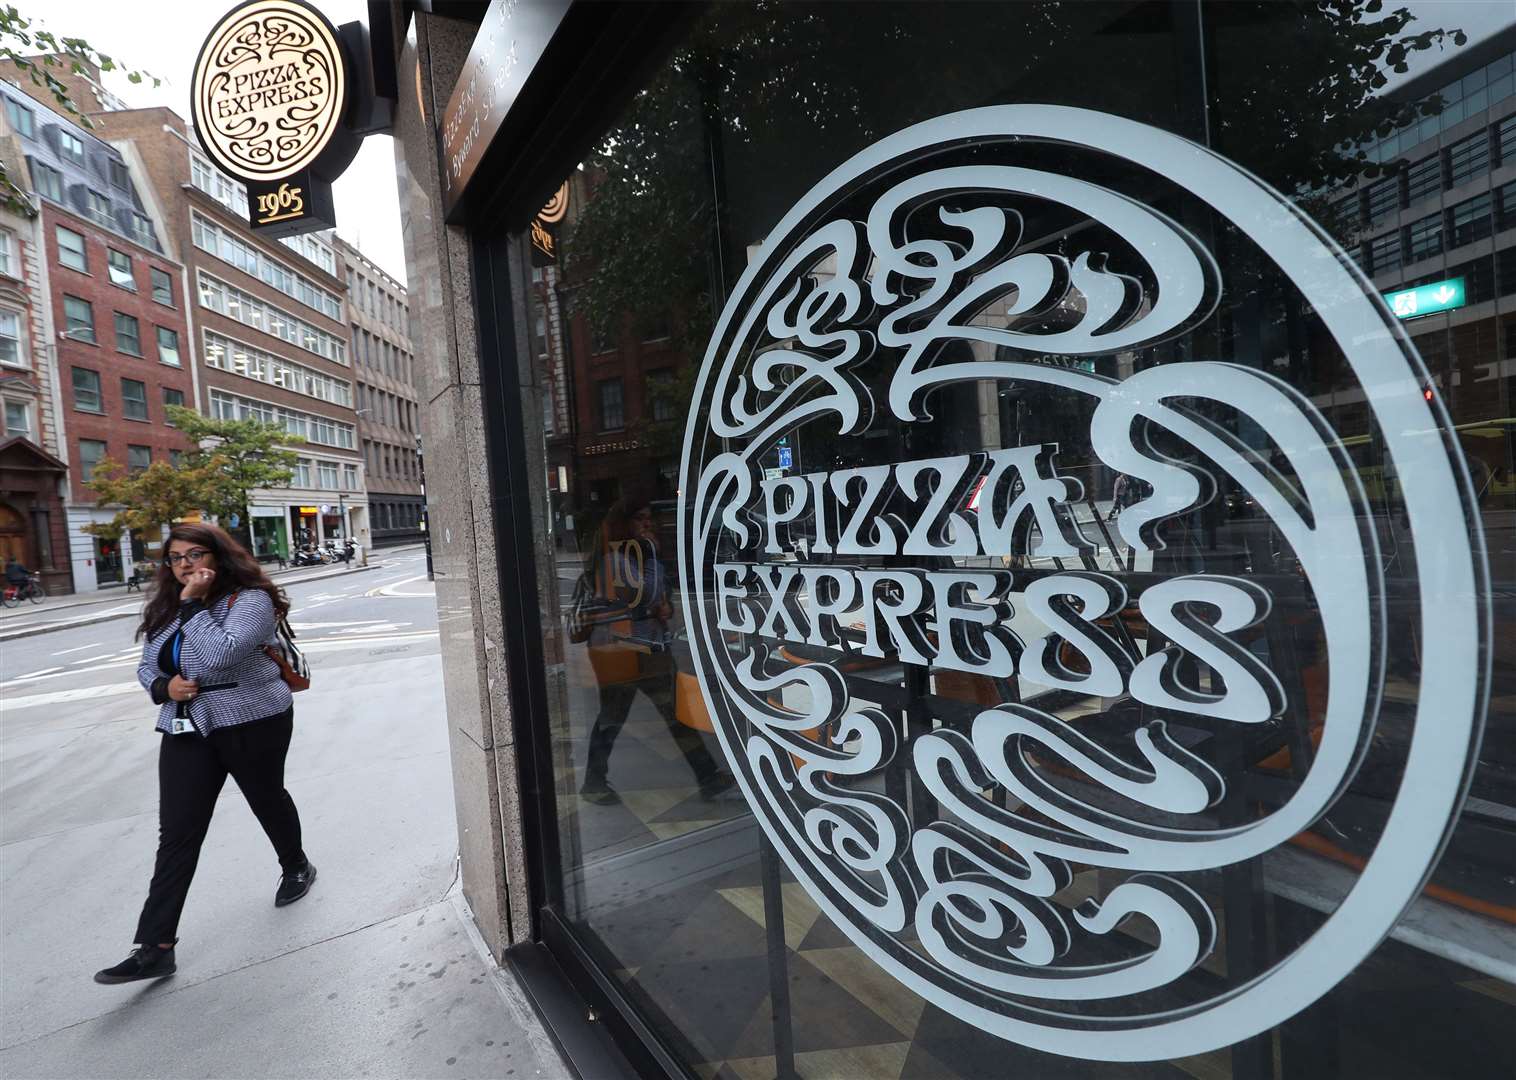 Pizza Express said there would be no further closures as part of its latest restructuring move (Yui Mok/PA)